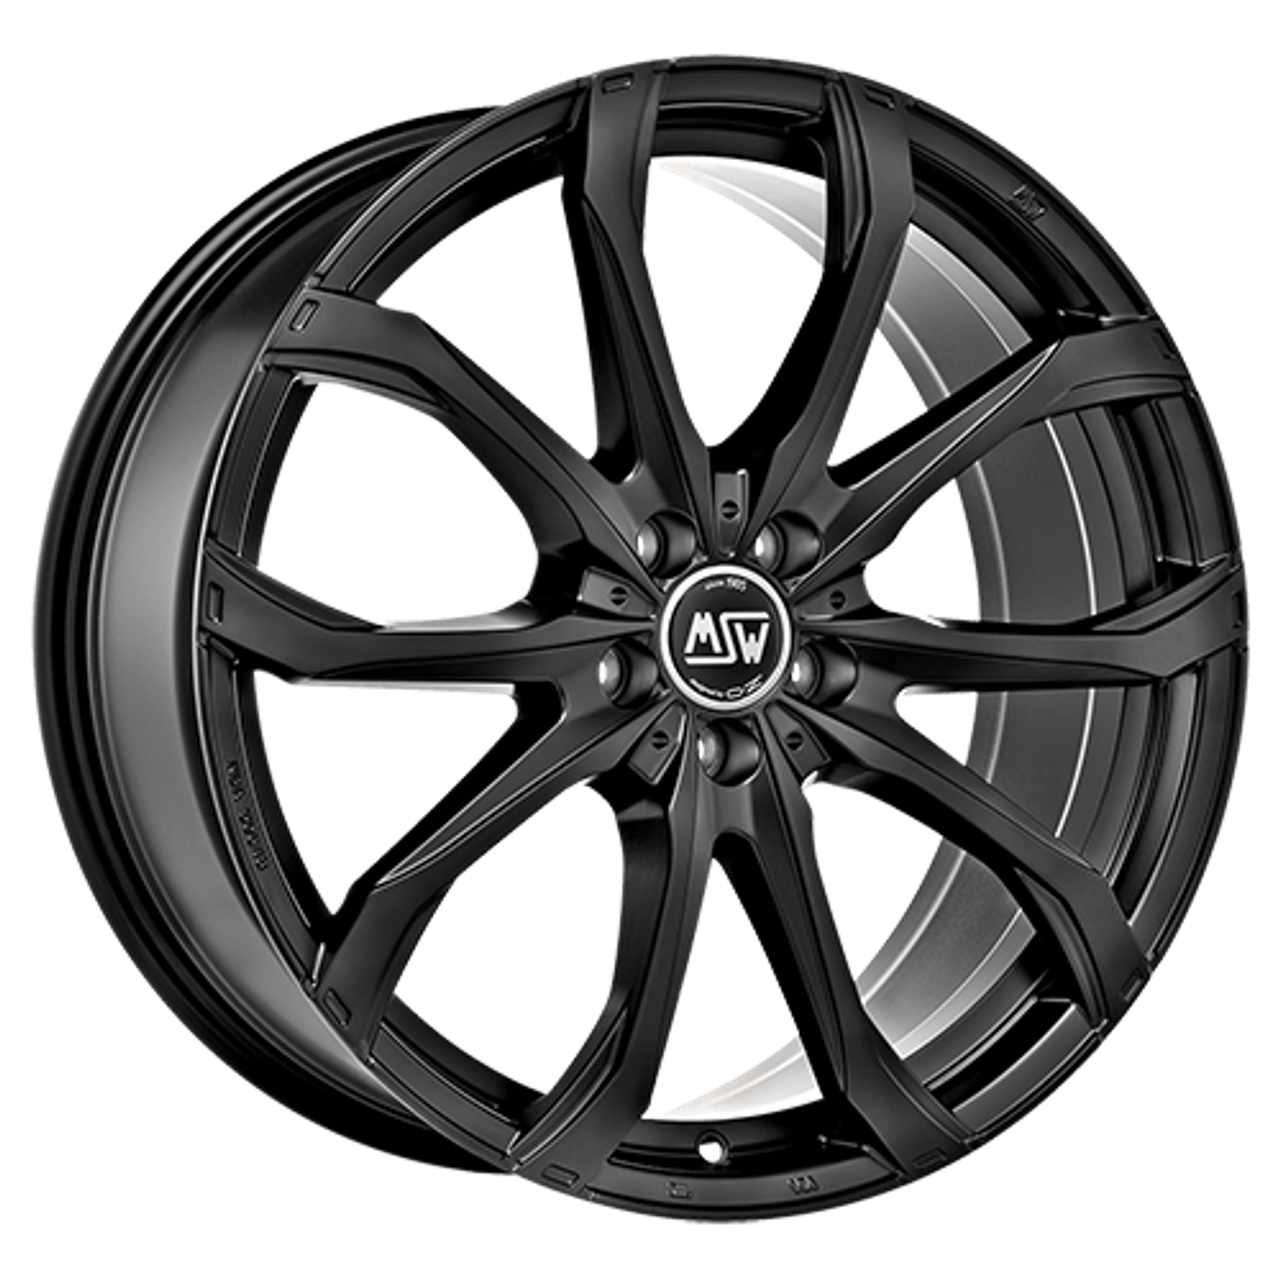 MSW (OZ) MSW 48 gloss black full polished 9.0Jx21 5x112 ET30